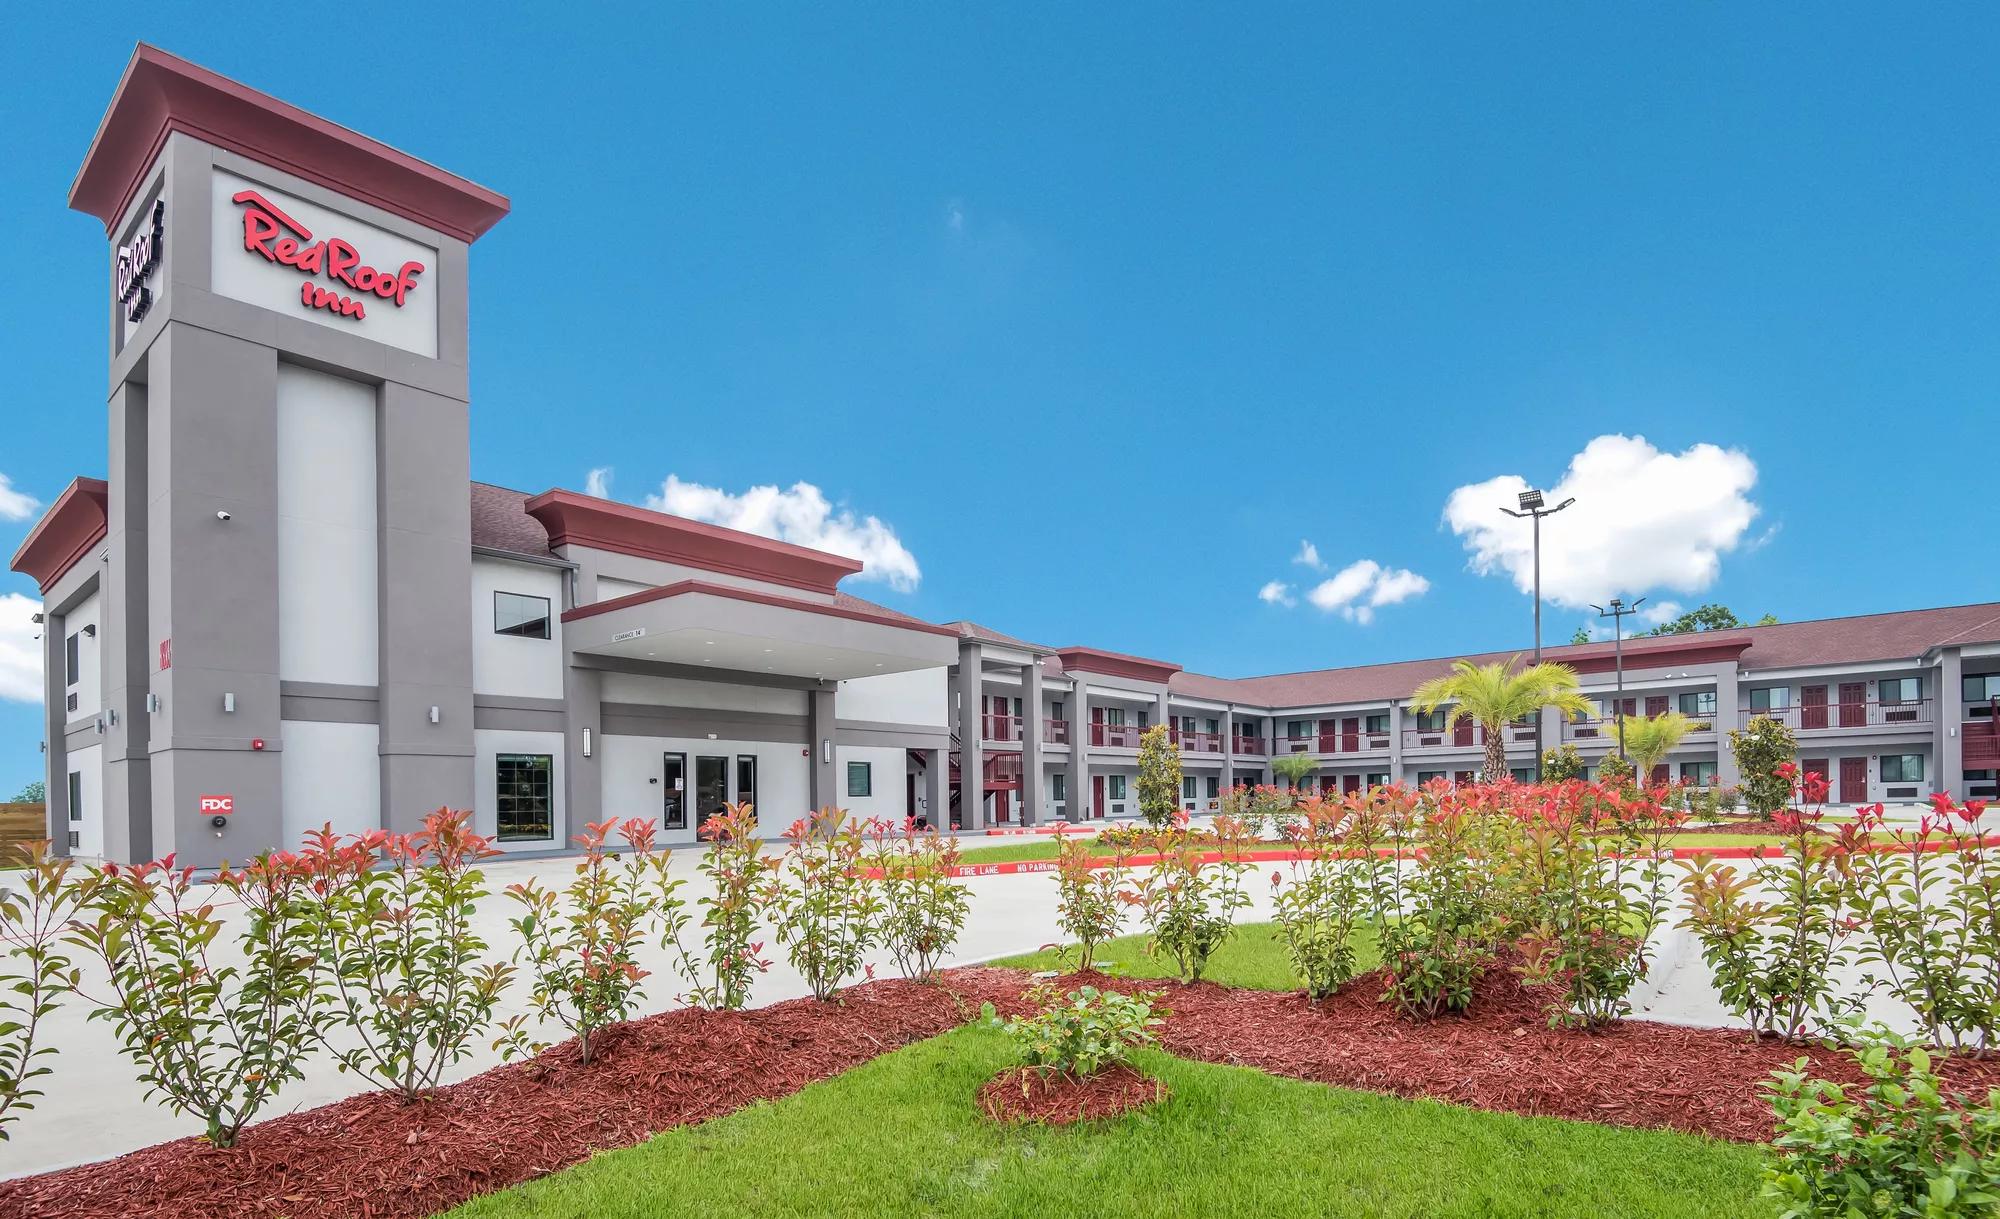 Red Roof Inn Baytown Property Exterior Image